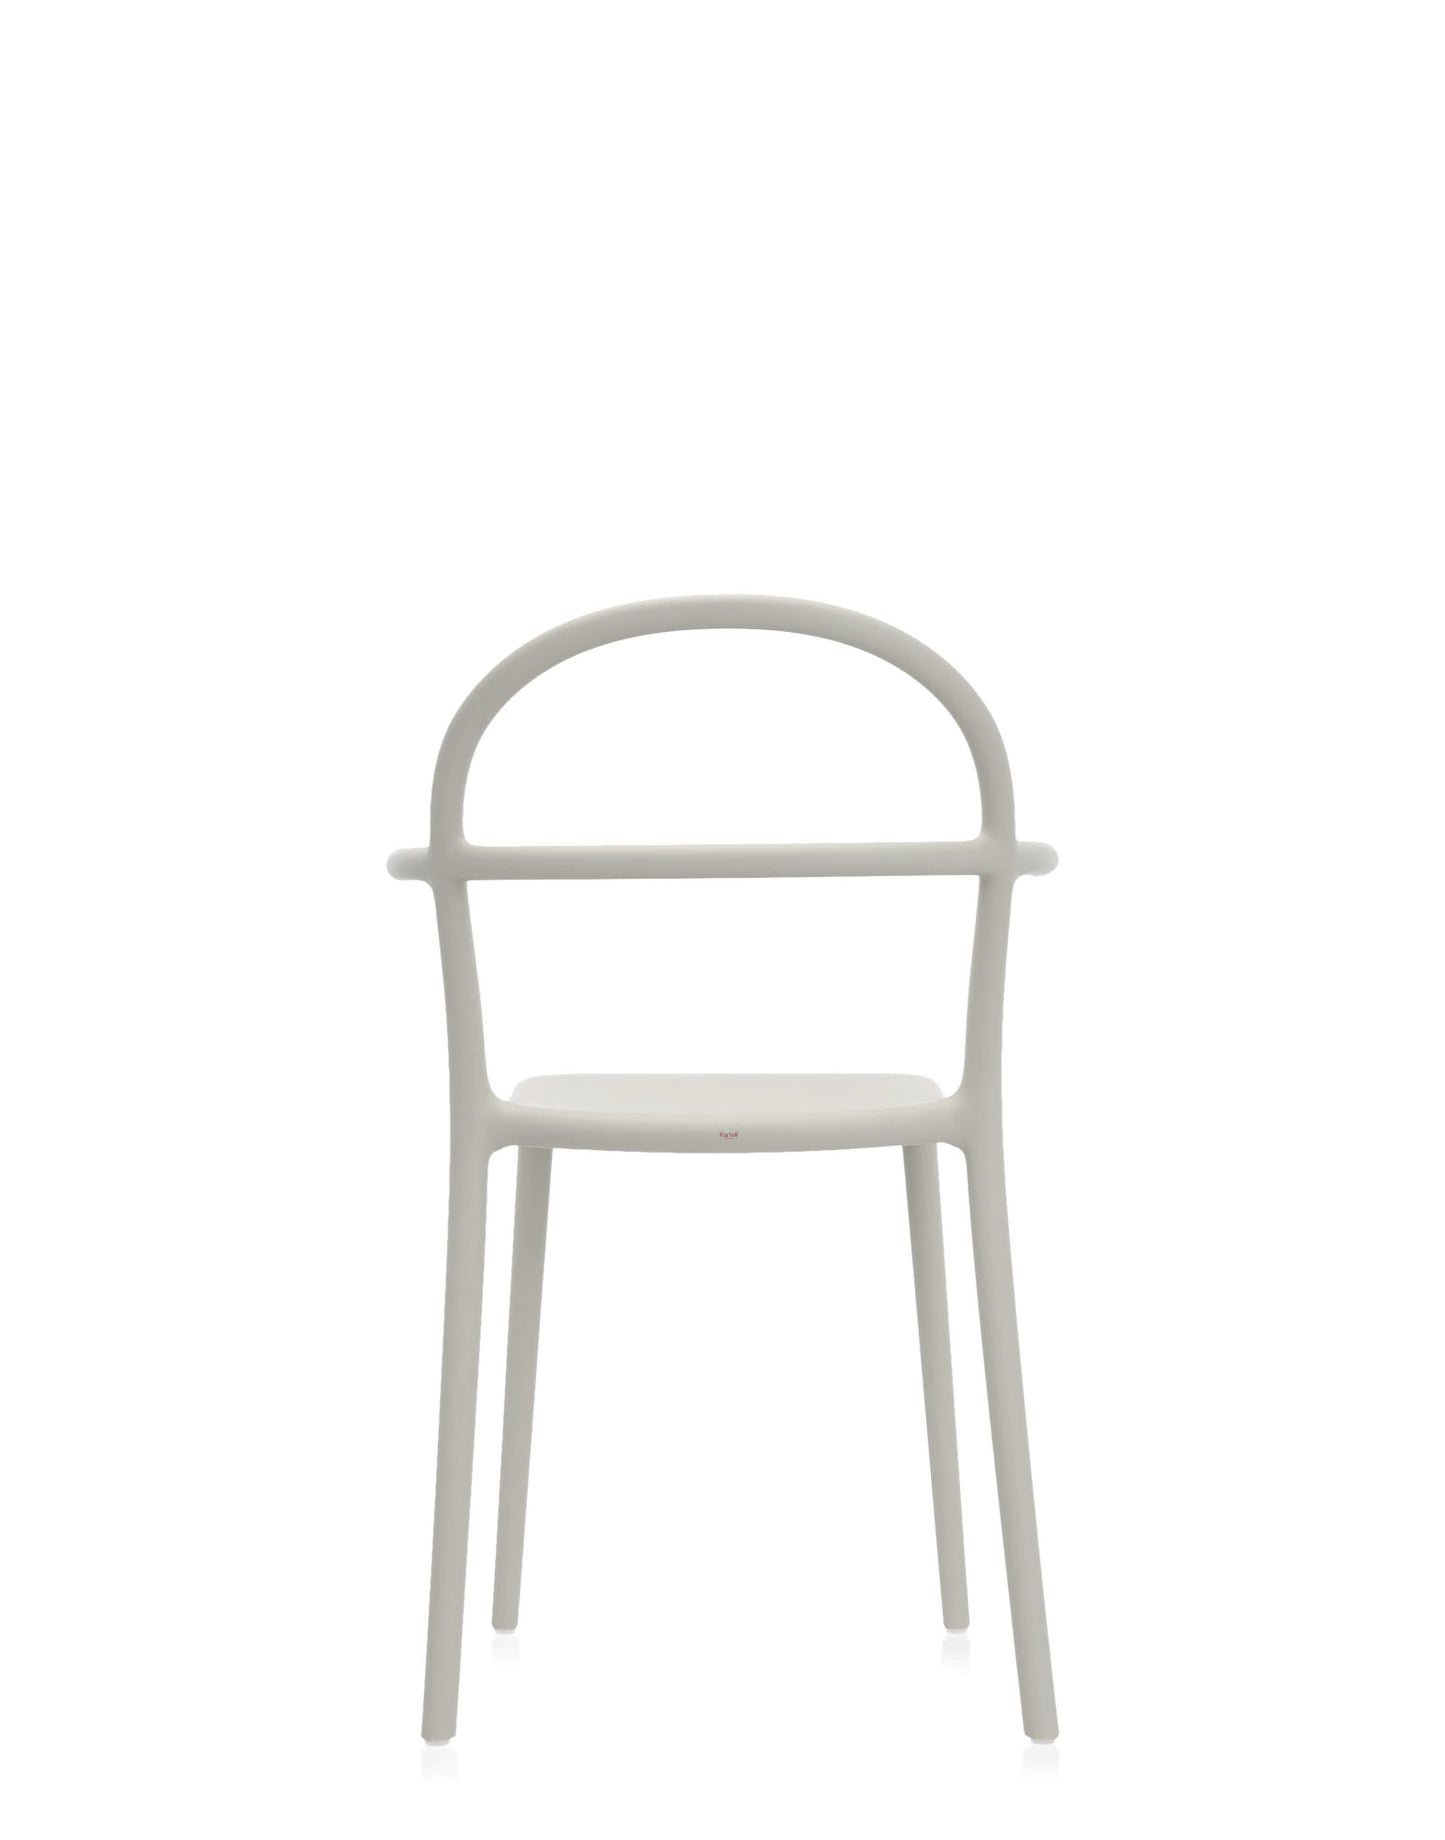 C Chair in Grey, Set of 2